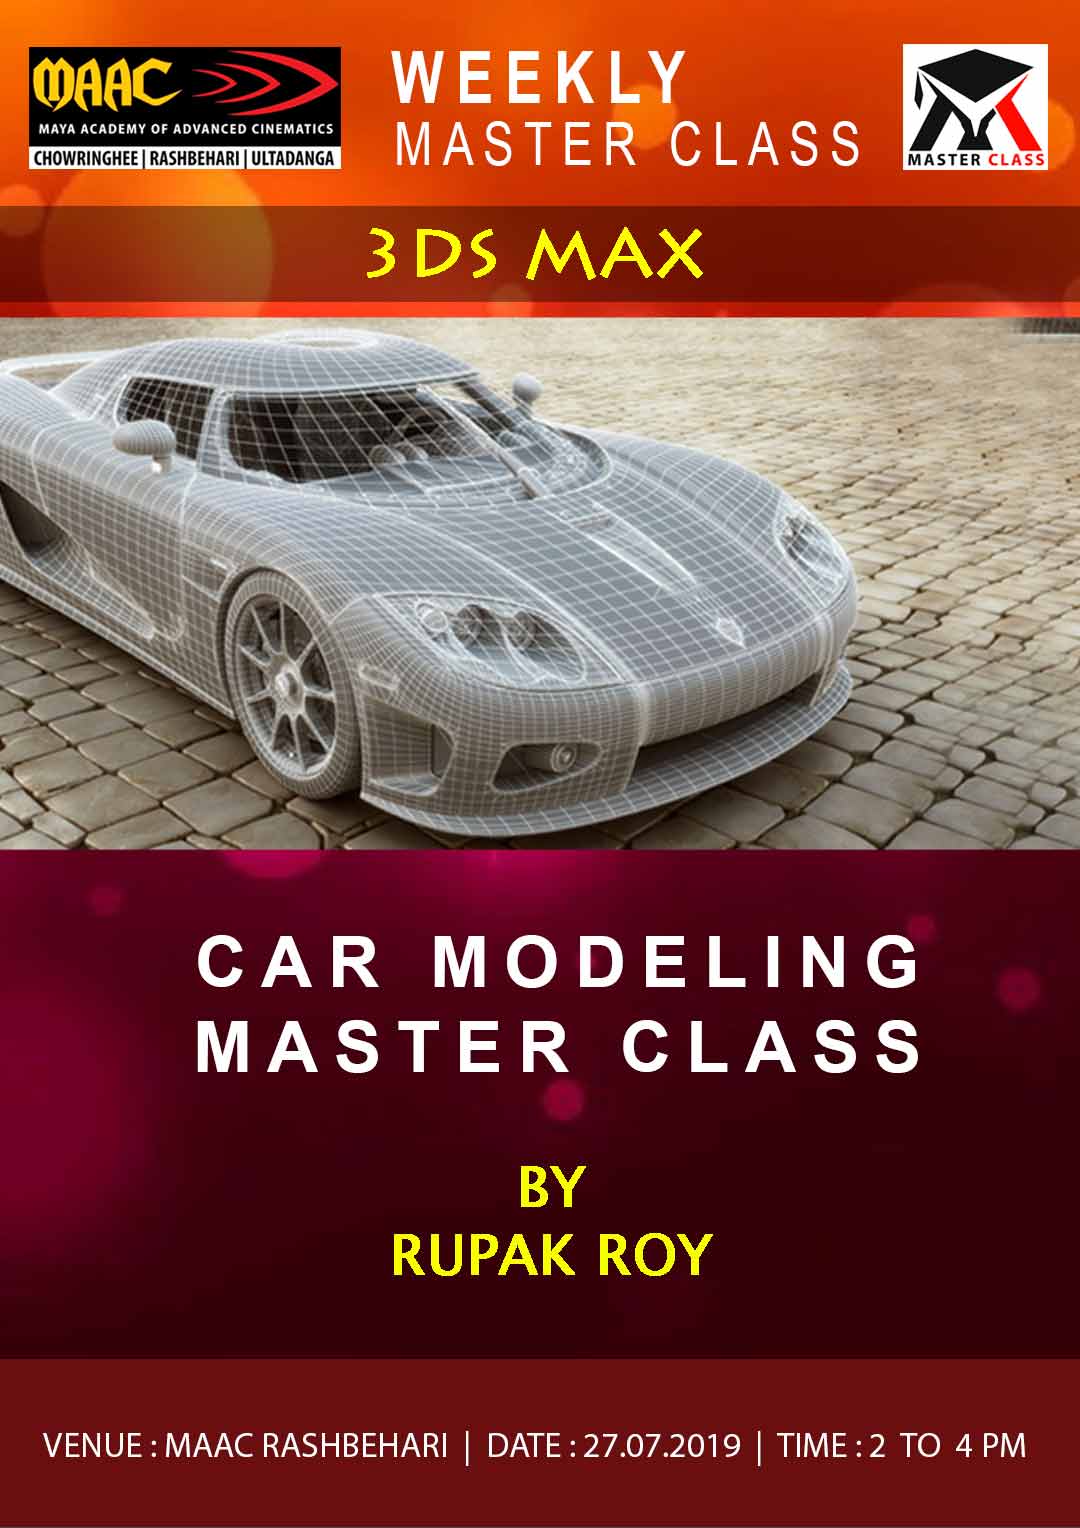 Weekly Master Class on Car Modeling in 3Ds Max